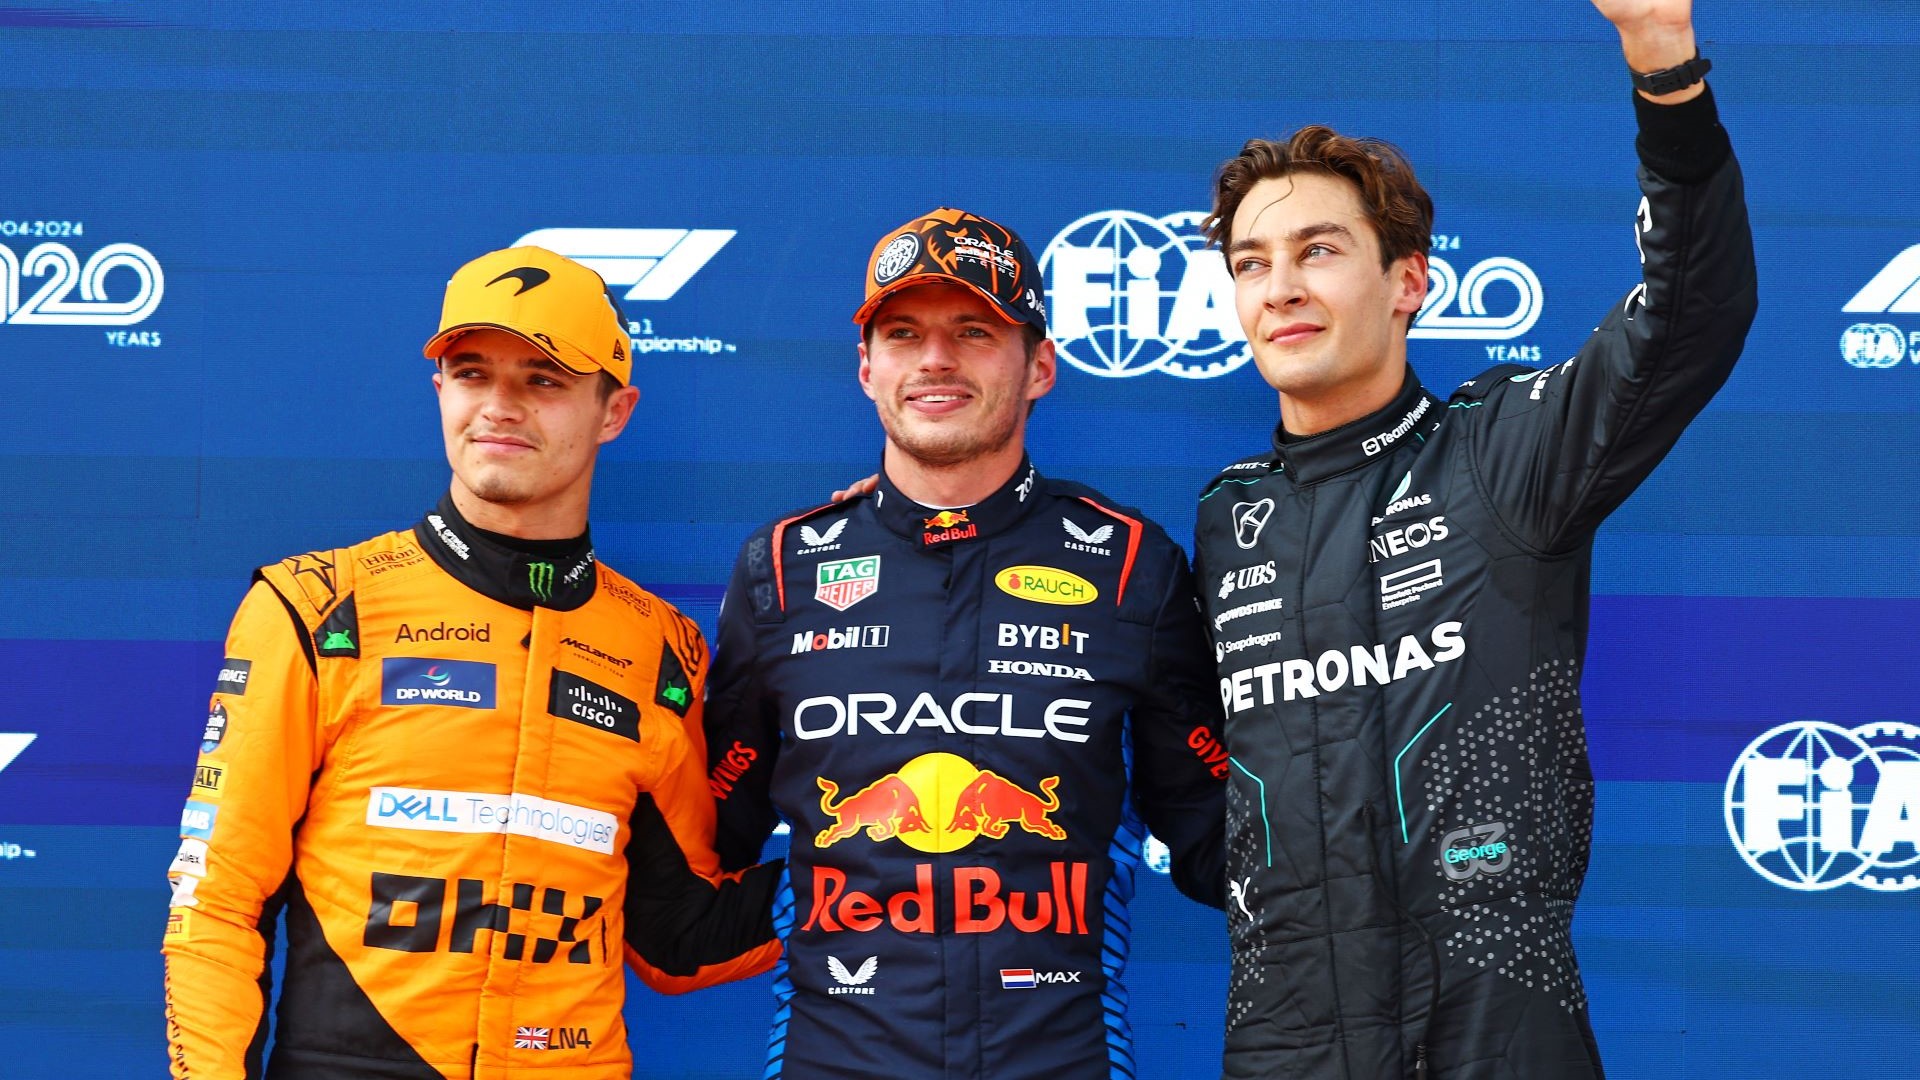 Pole position qualifier Max Verstappen of the Netherlands and Oracle Red Bull Racing, Second placed qualifier Lando Norris of Great Britain and McLaren and Third placed George Russell of Great Britain and Mercedes pose for a photo in parc ferme during qualifying ahead of the F1 Grand Prix of Austria.